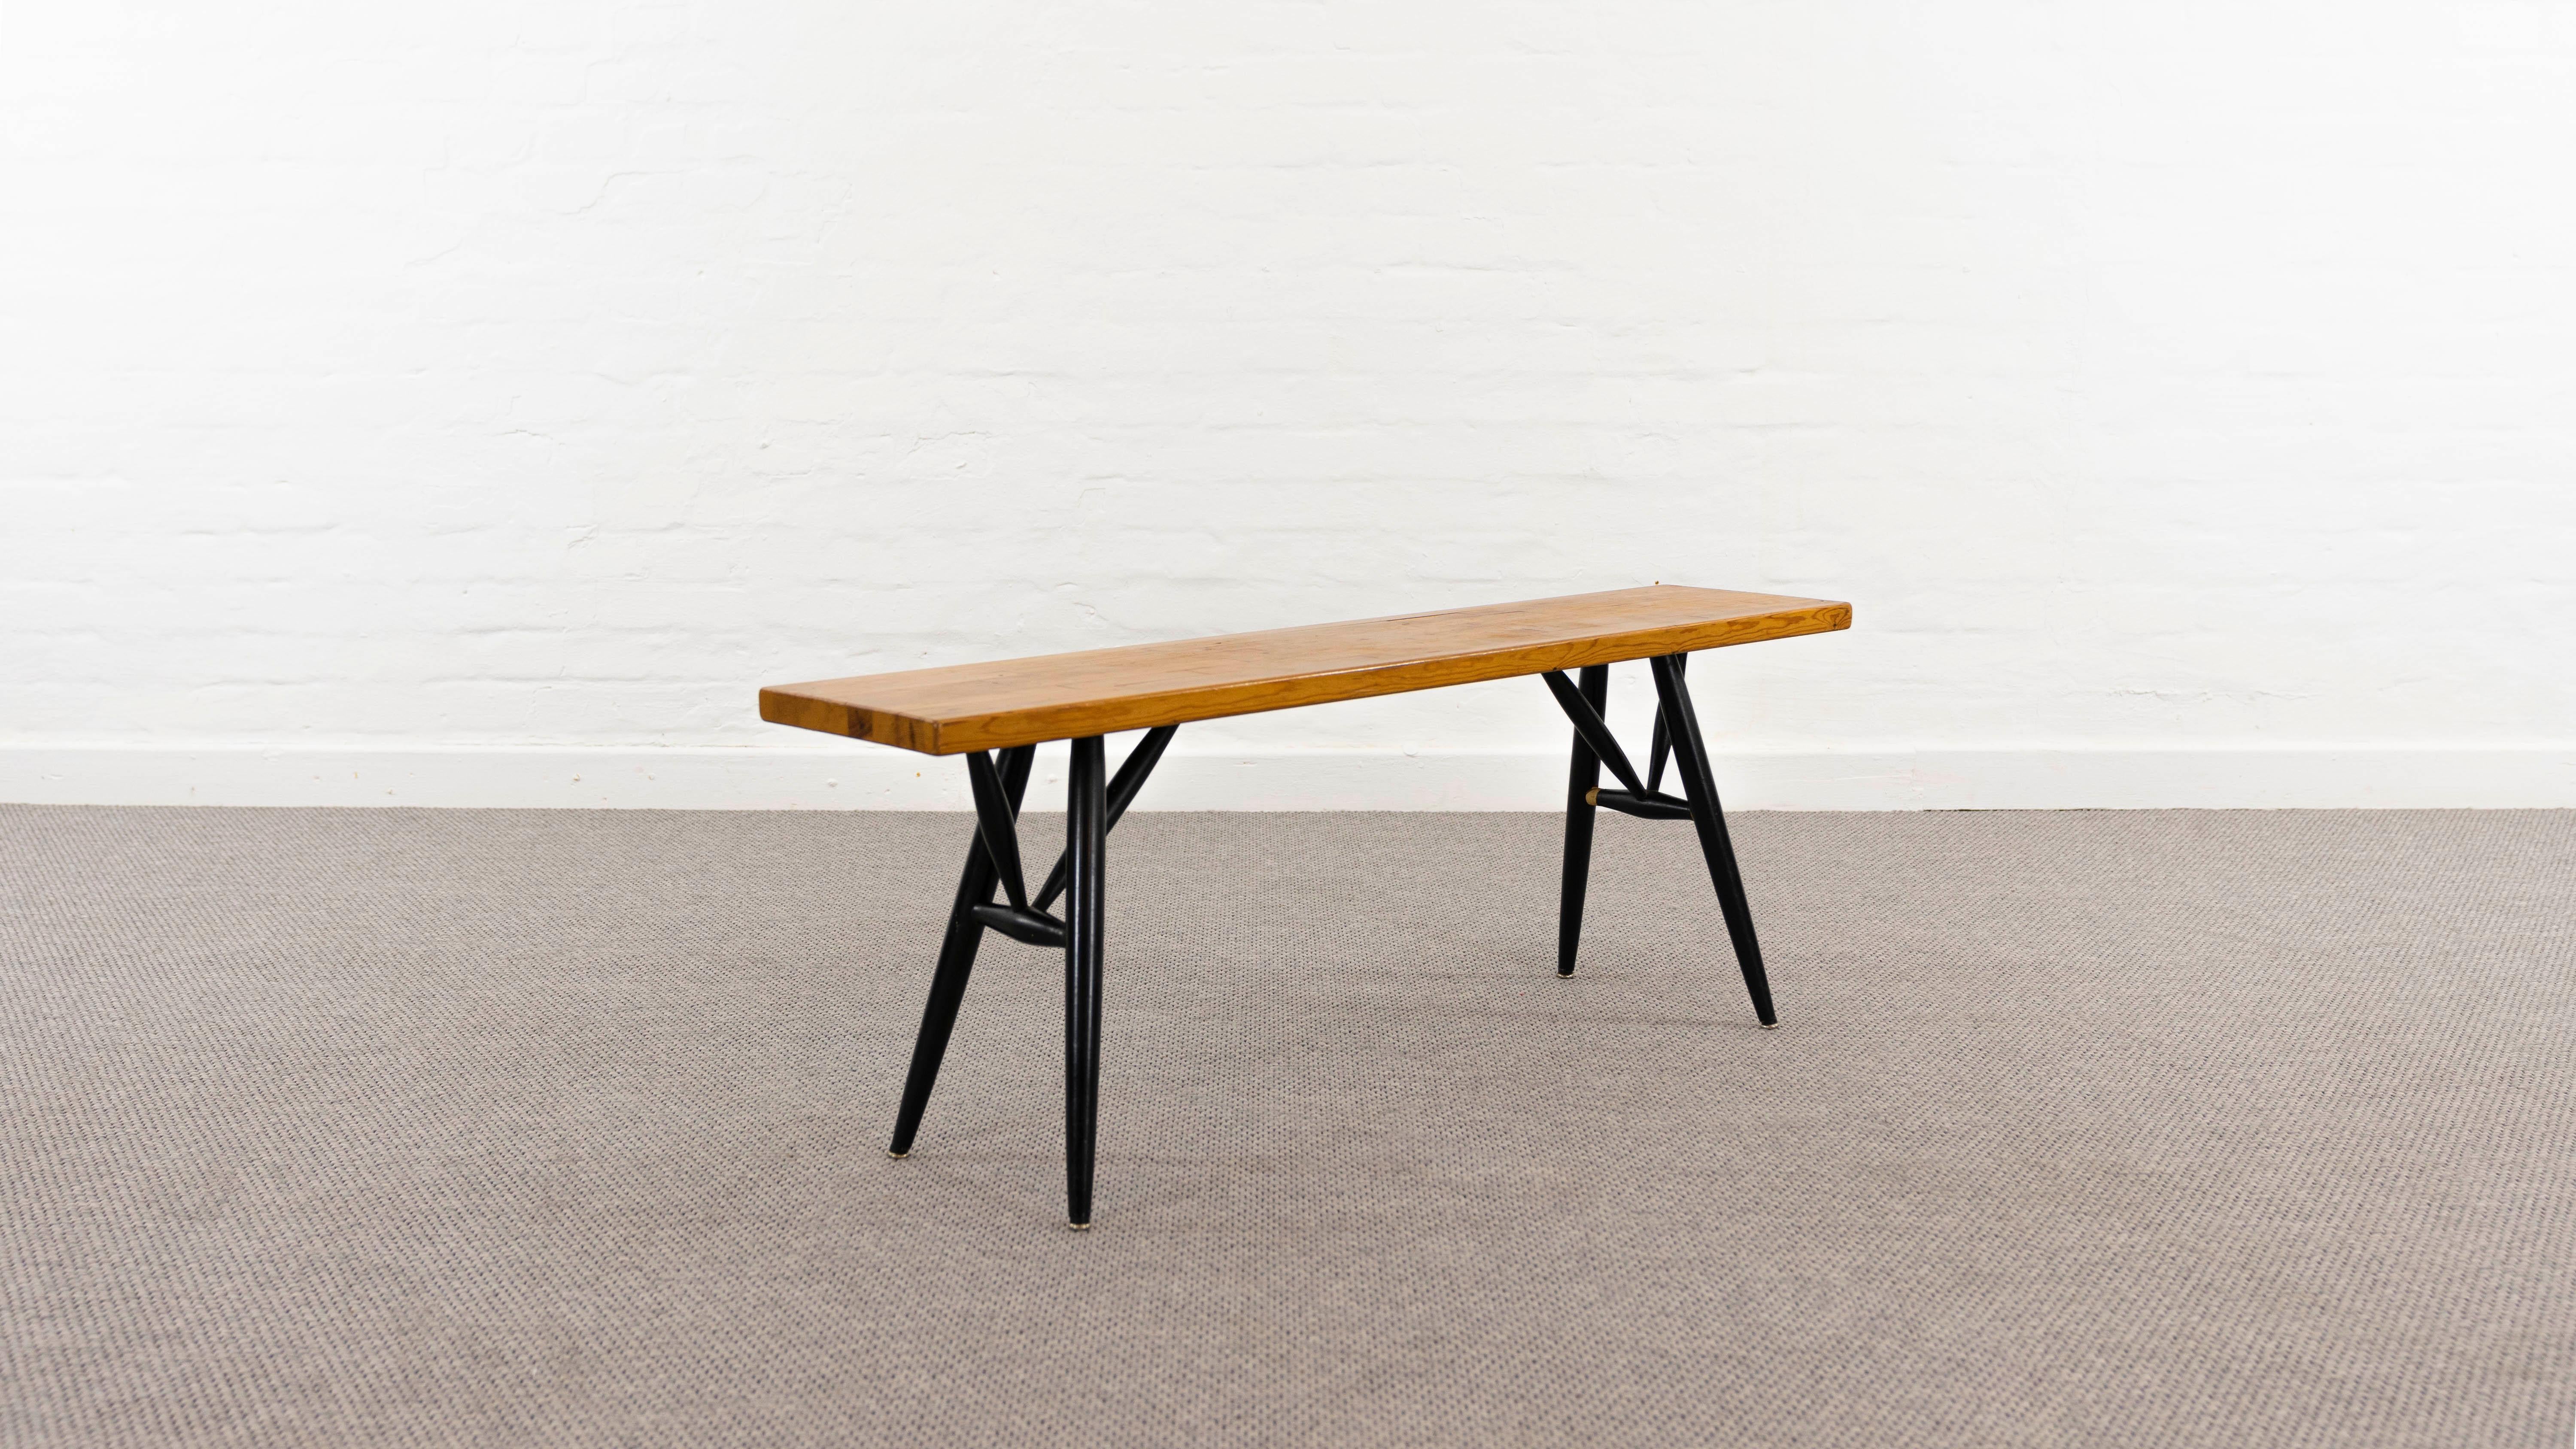 Mid Century Pirkka Bench. Designed by Ilmari Tapiovaara 1955, manufactured by Laukaan Puu, Finland. Pine seat and the legs are made from black lacquered beech. Signed underneath with brand stamp.